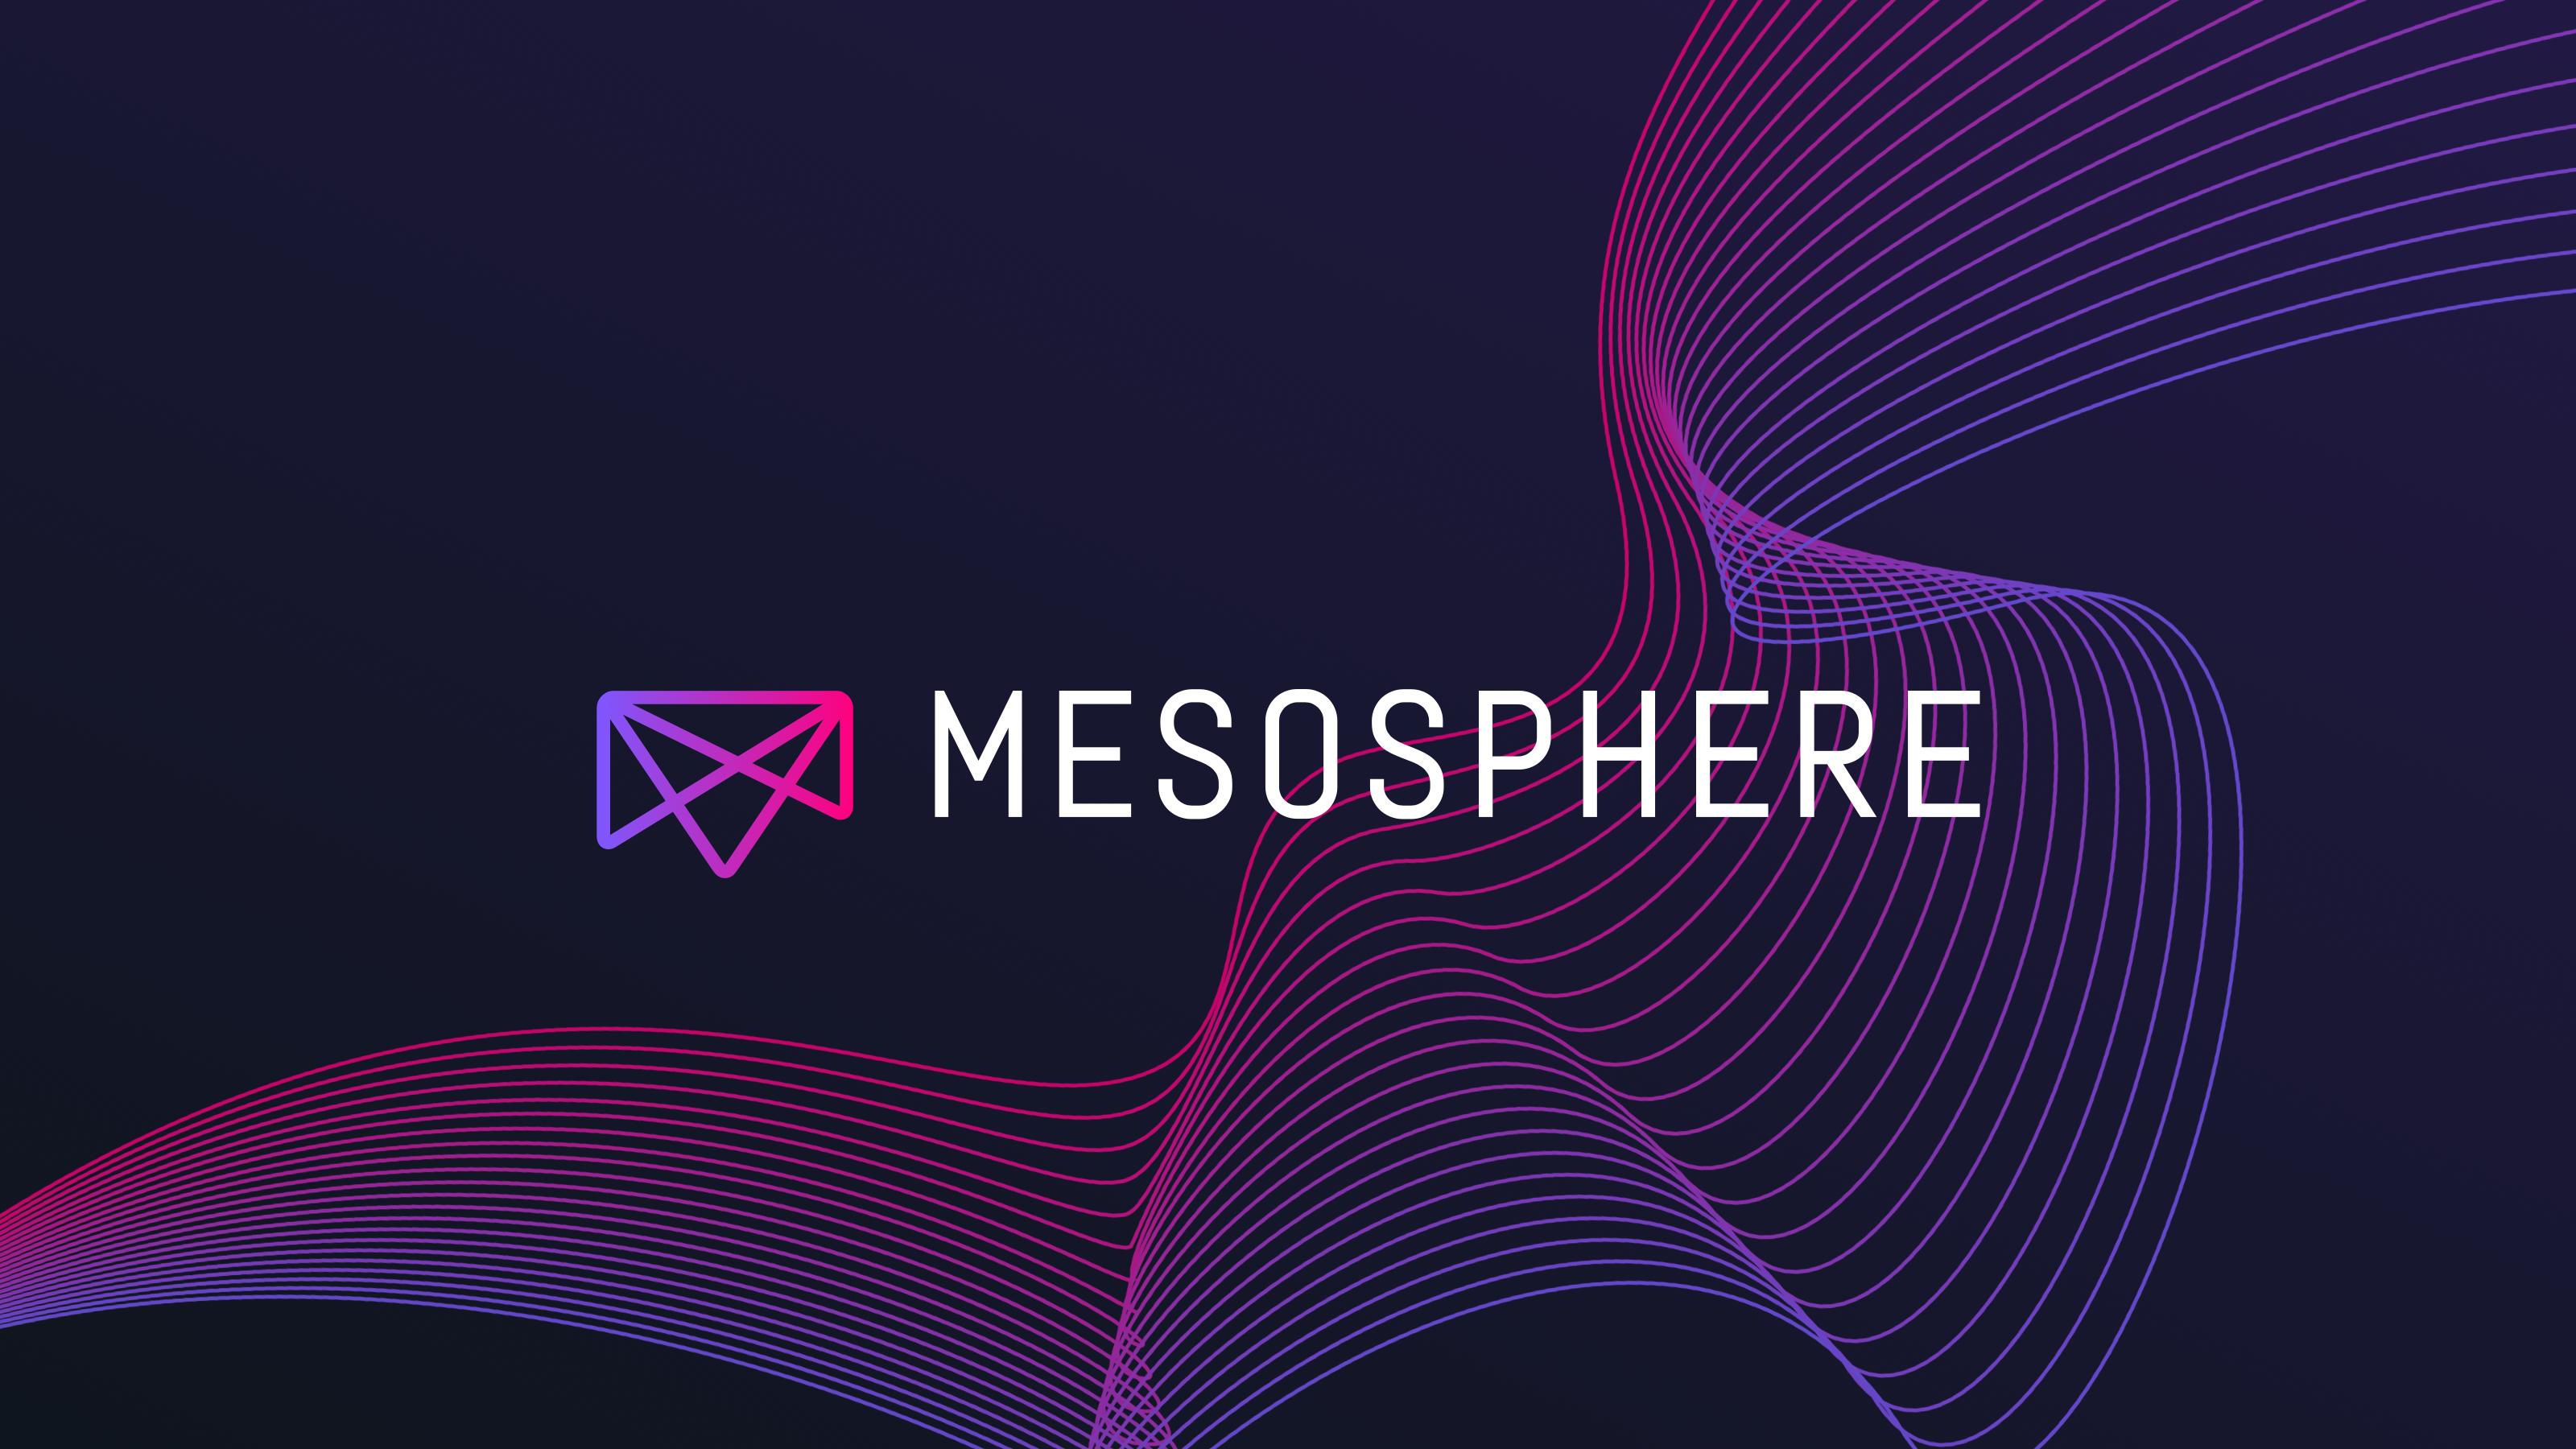 Mesosphere More Than Triples Revenue Year-over-Year